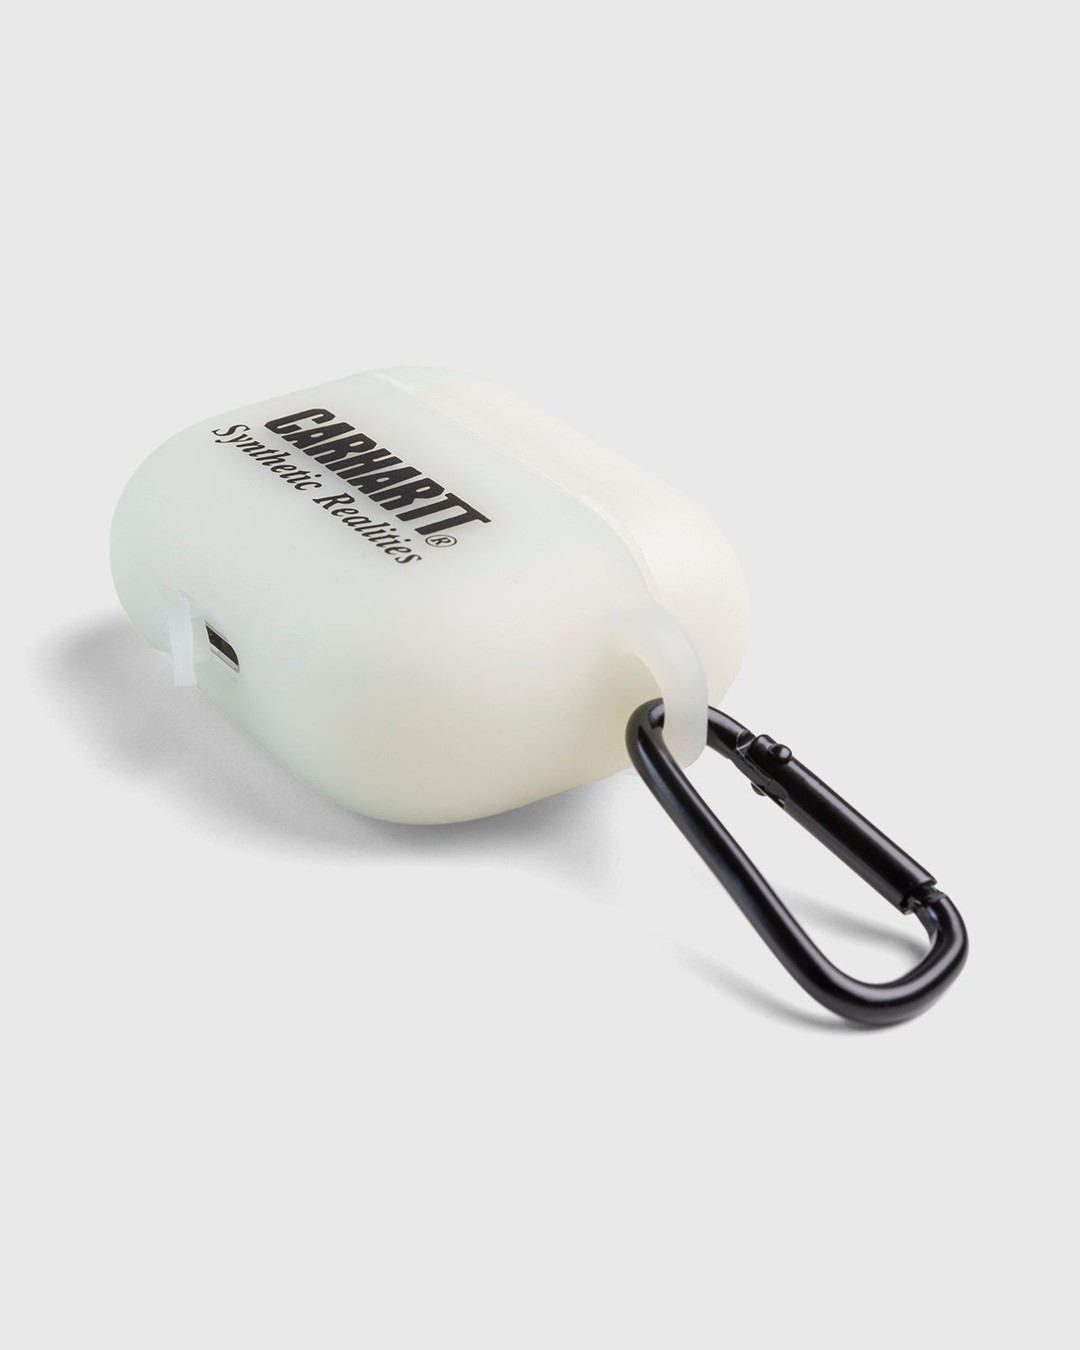 Carhartt WIP – Synthetic Realities AirPods Case Glow In The Dark Black - Phone cases - White - Image 3